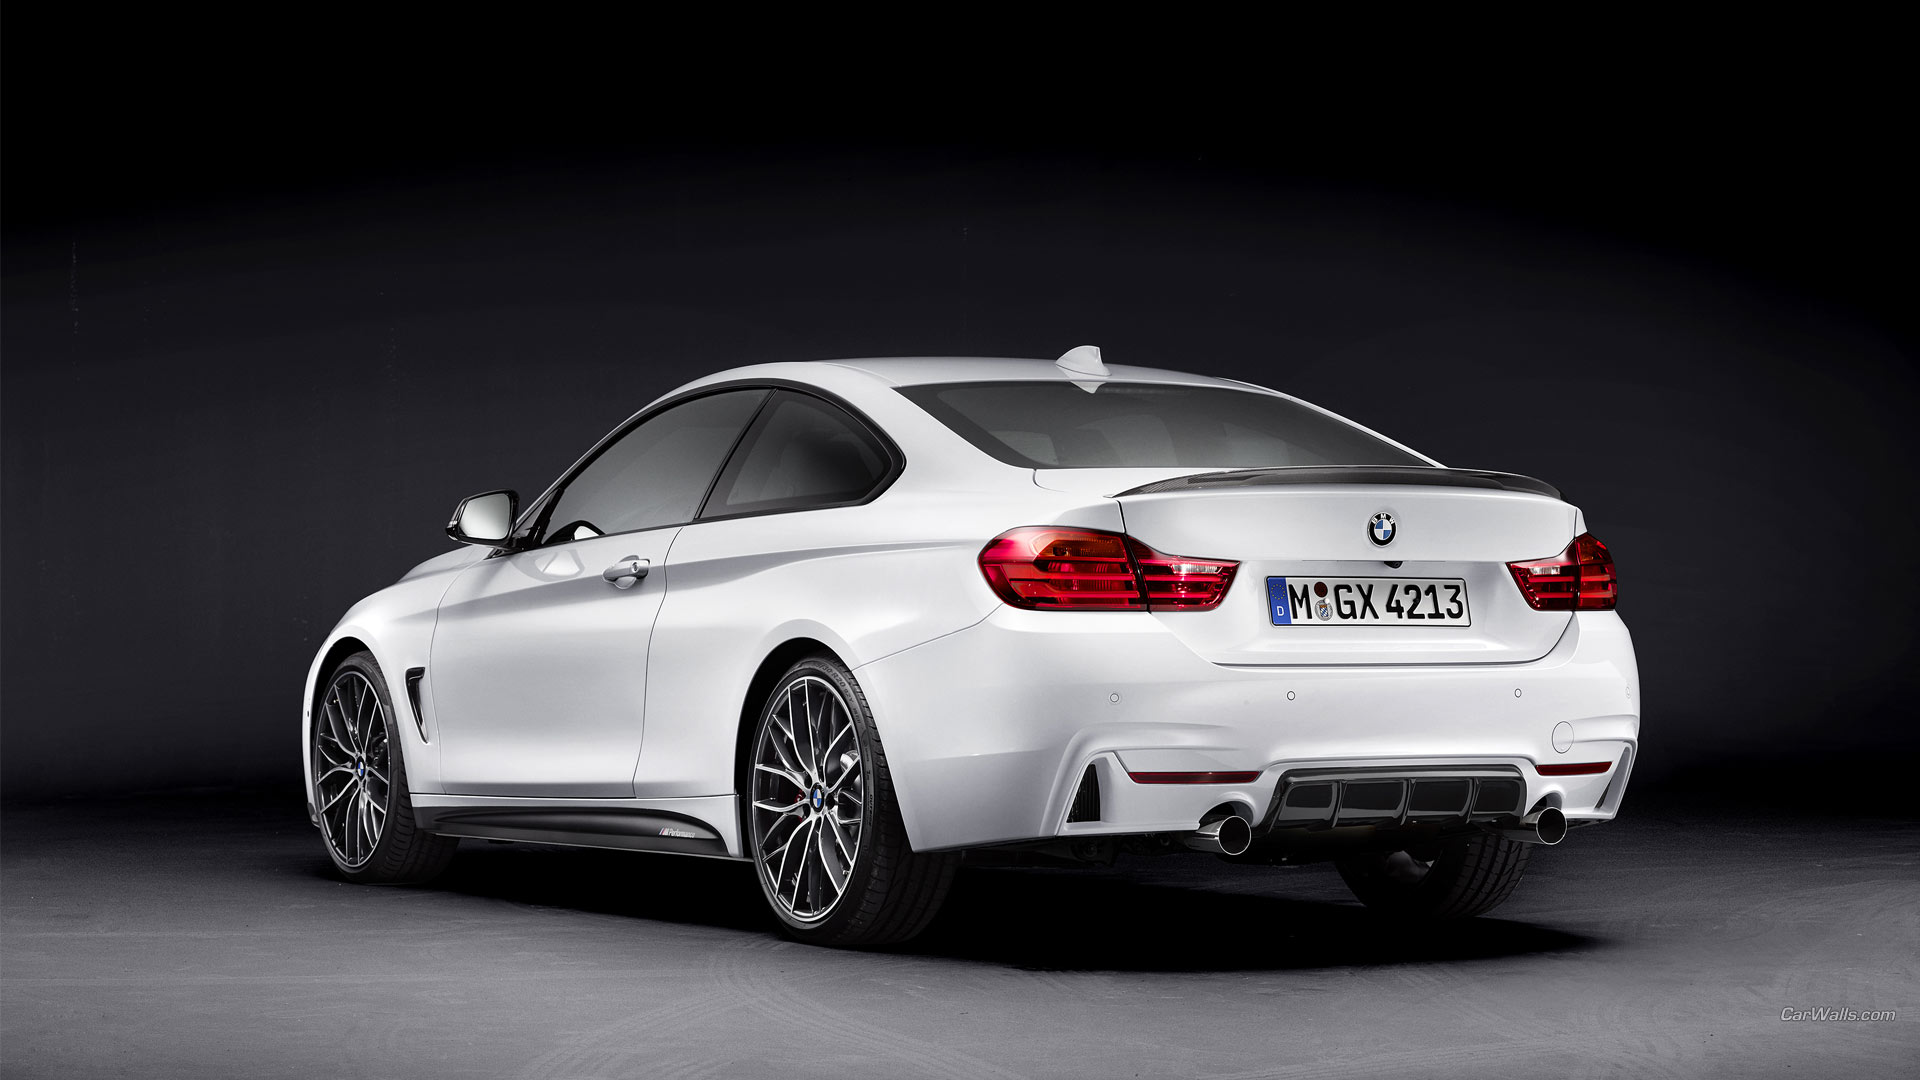 PC Wallpapers vehicles, bmw 4 series